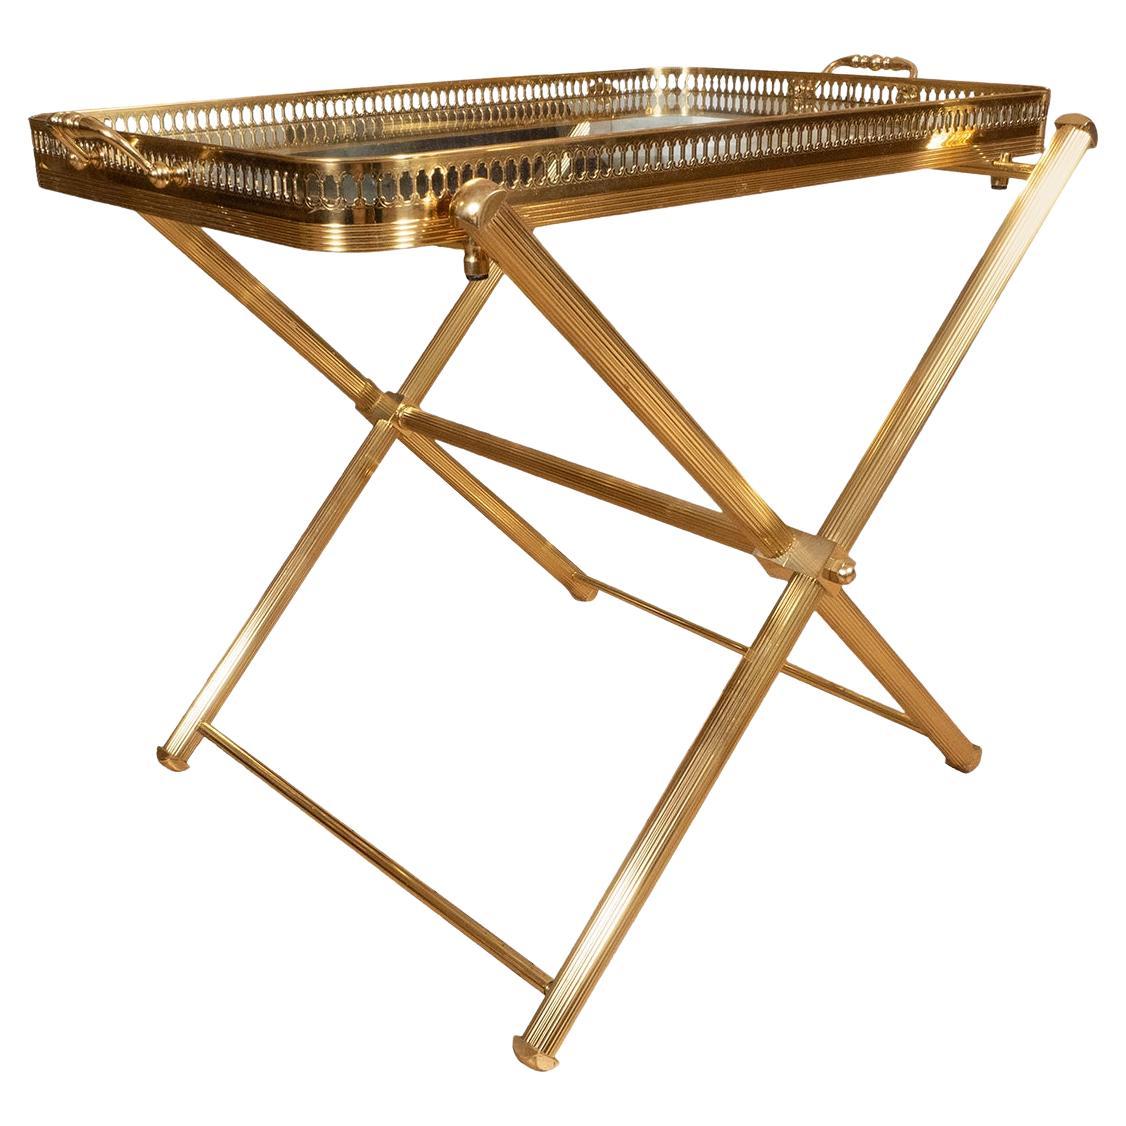 Pair of brass side tables with removable trays